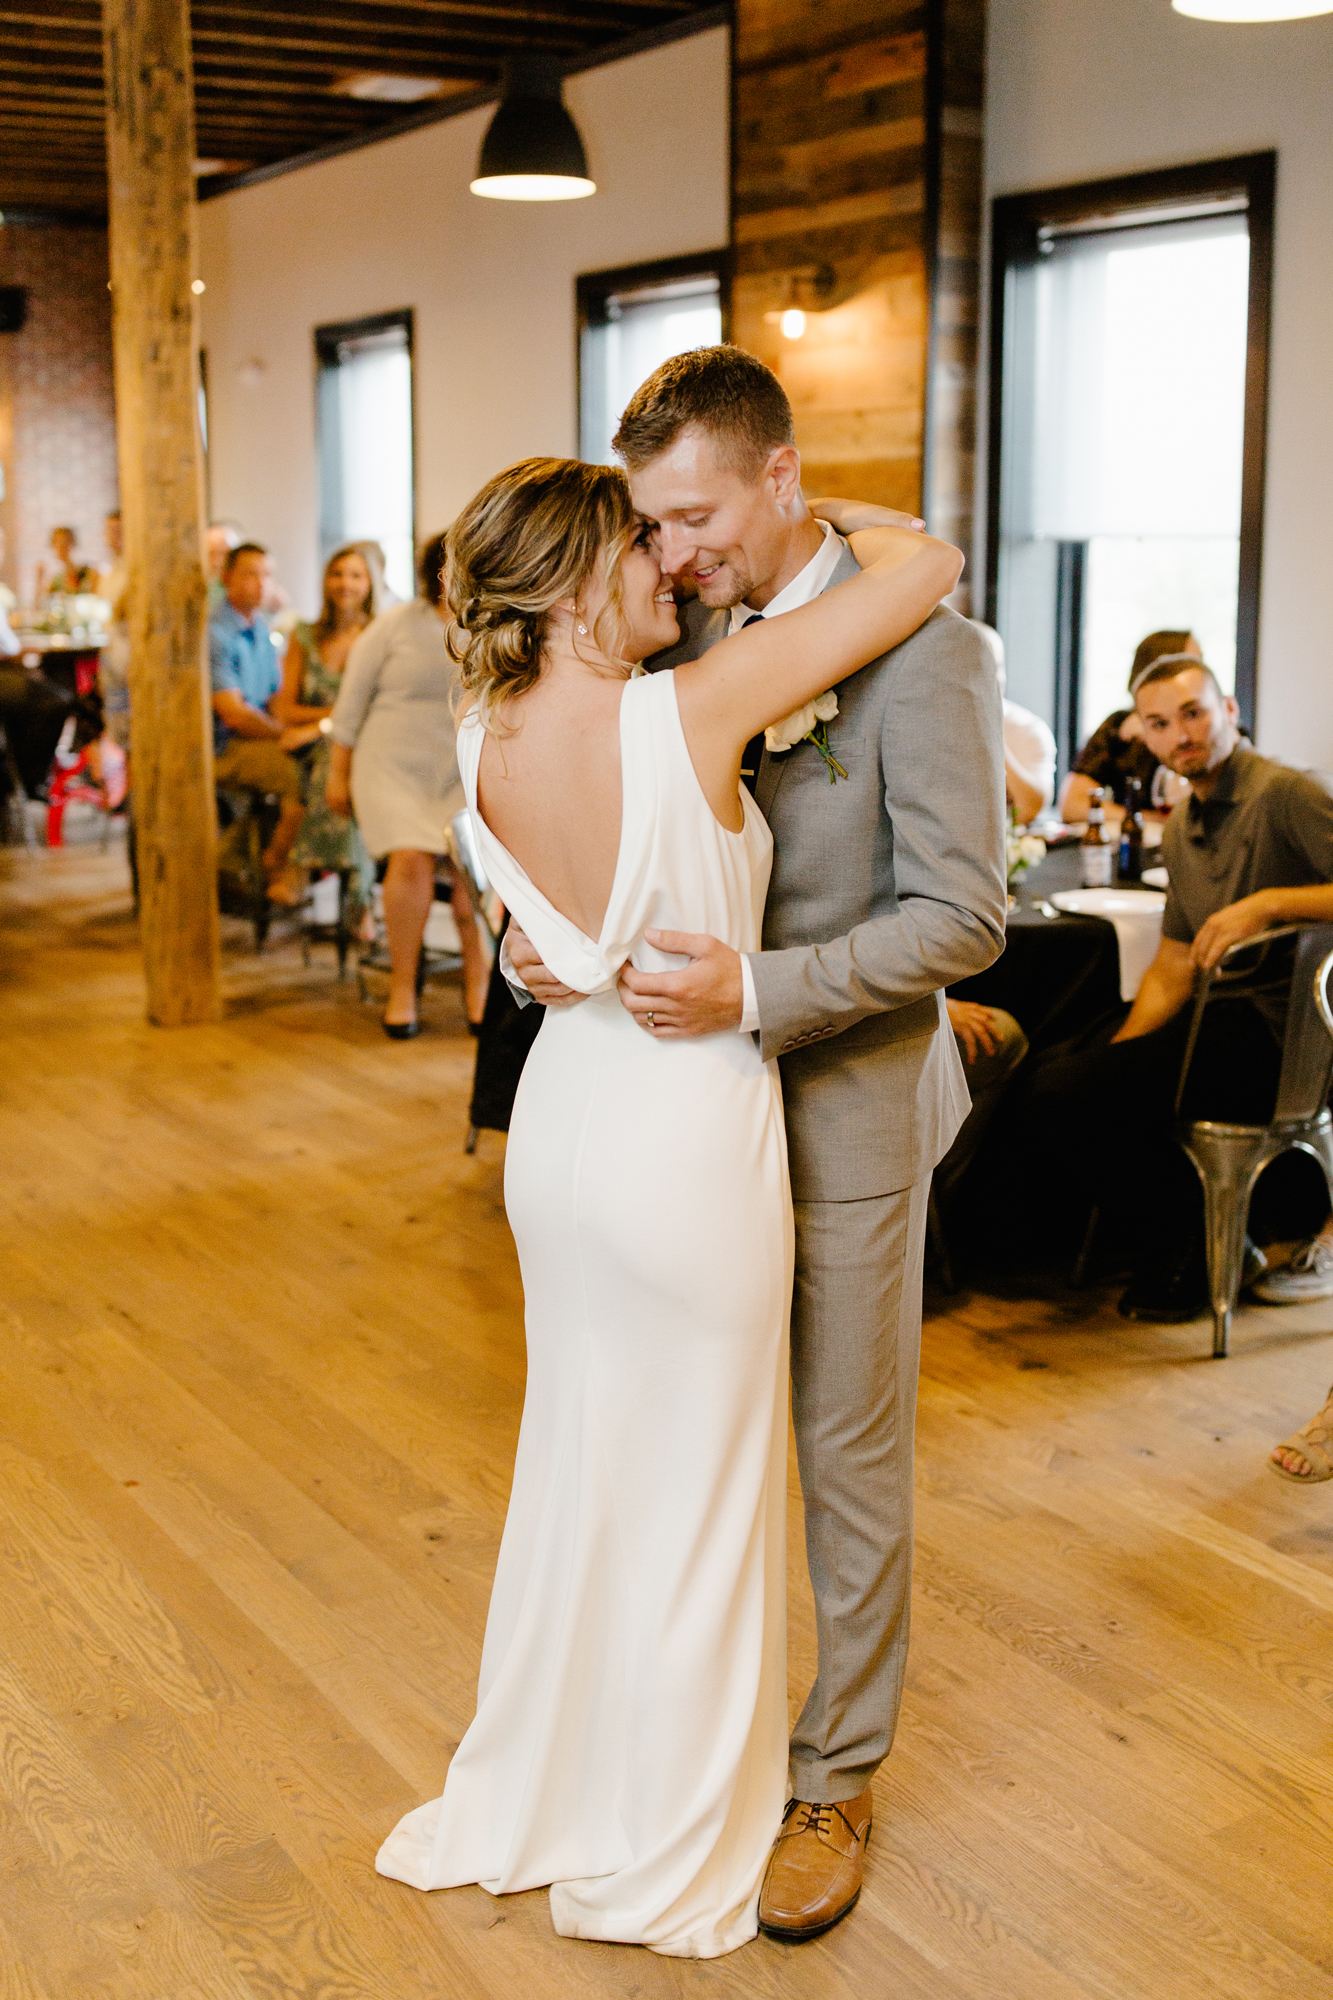 First Dance as a Married Couple